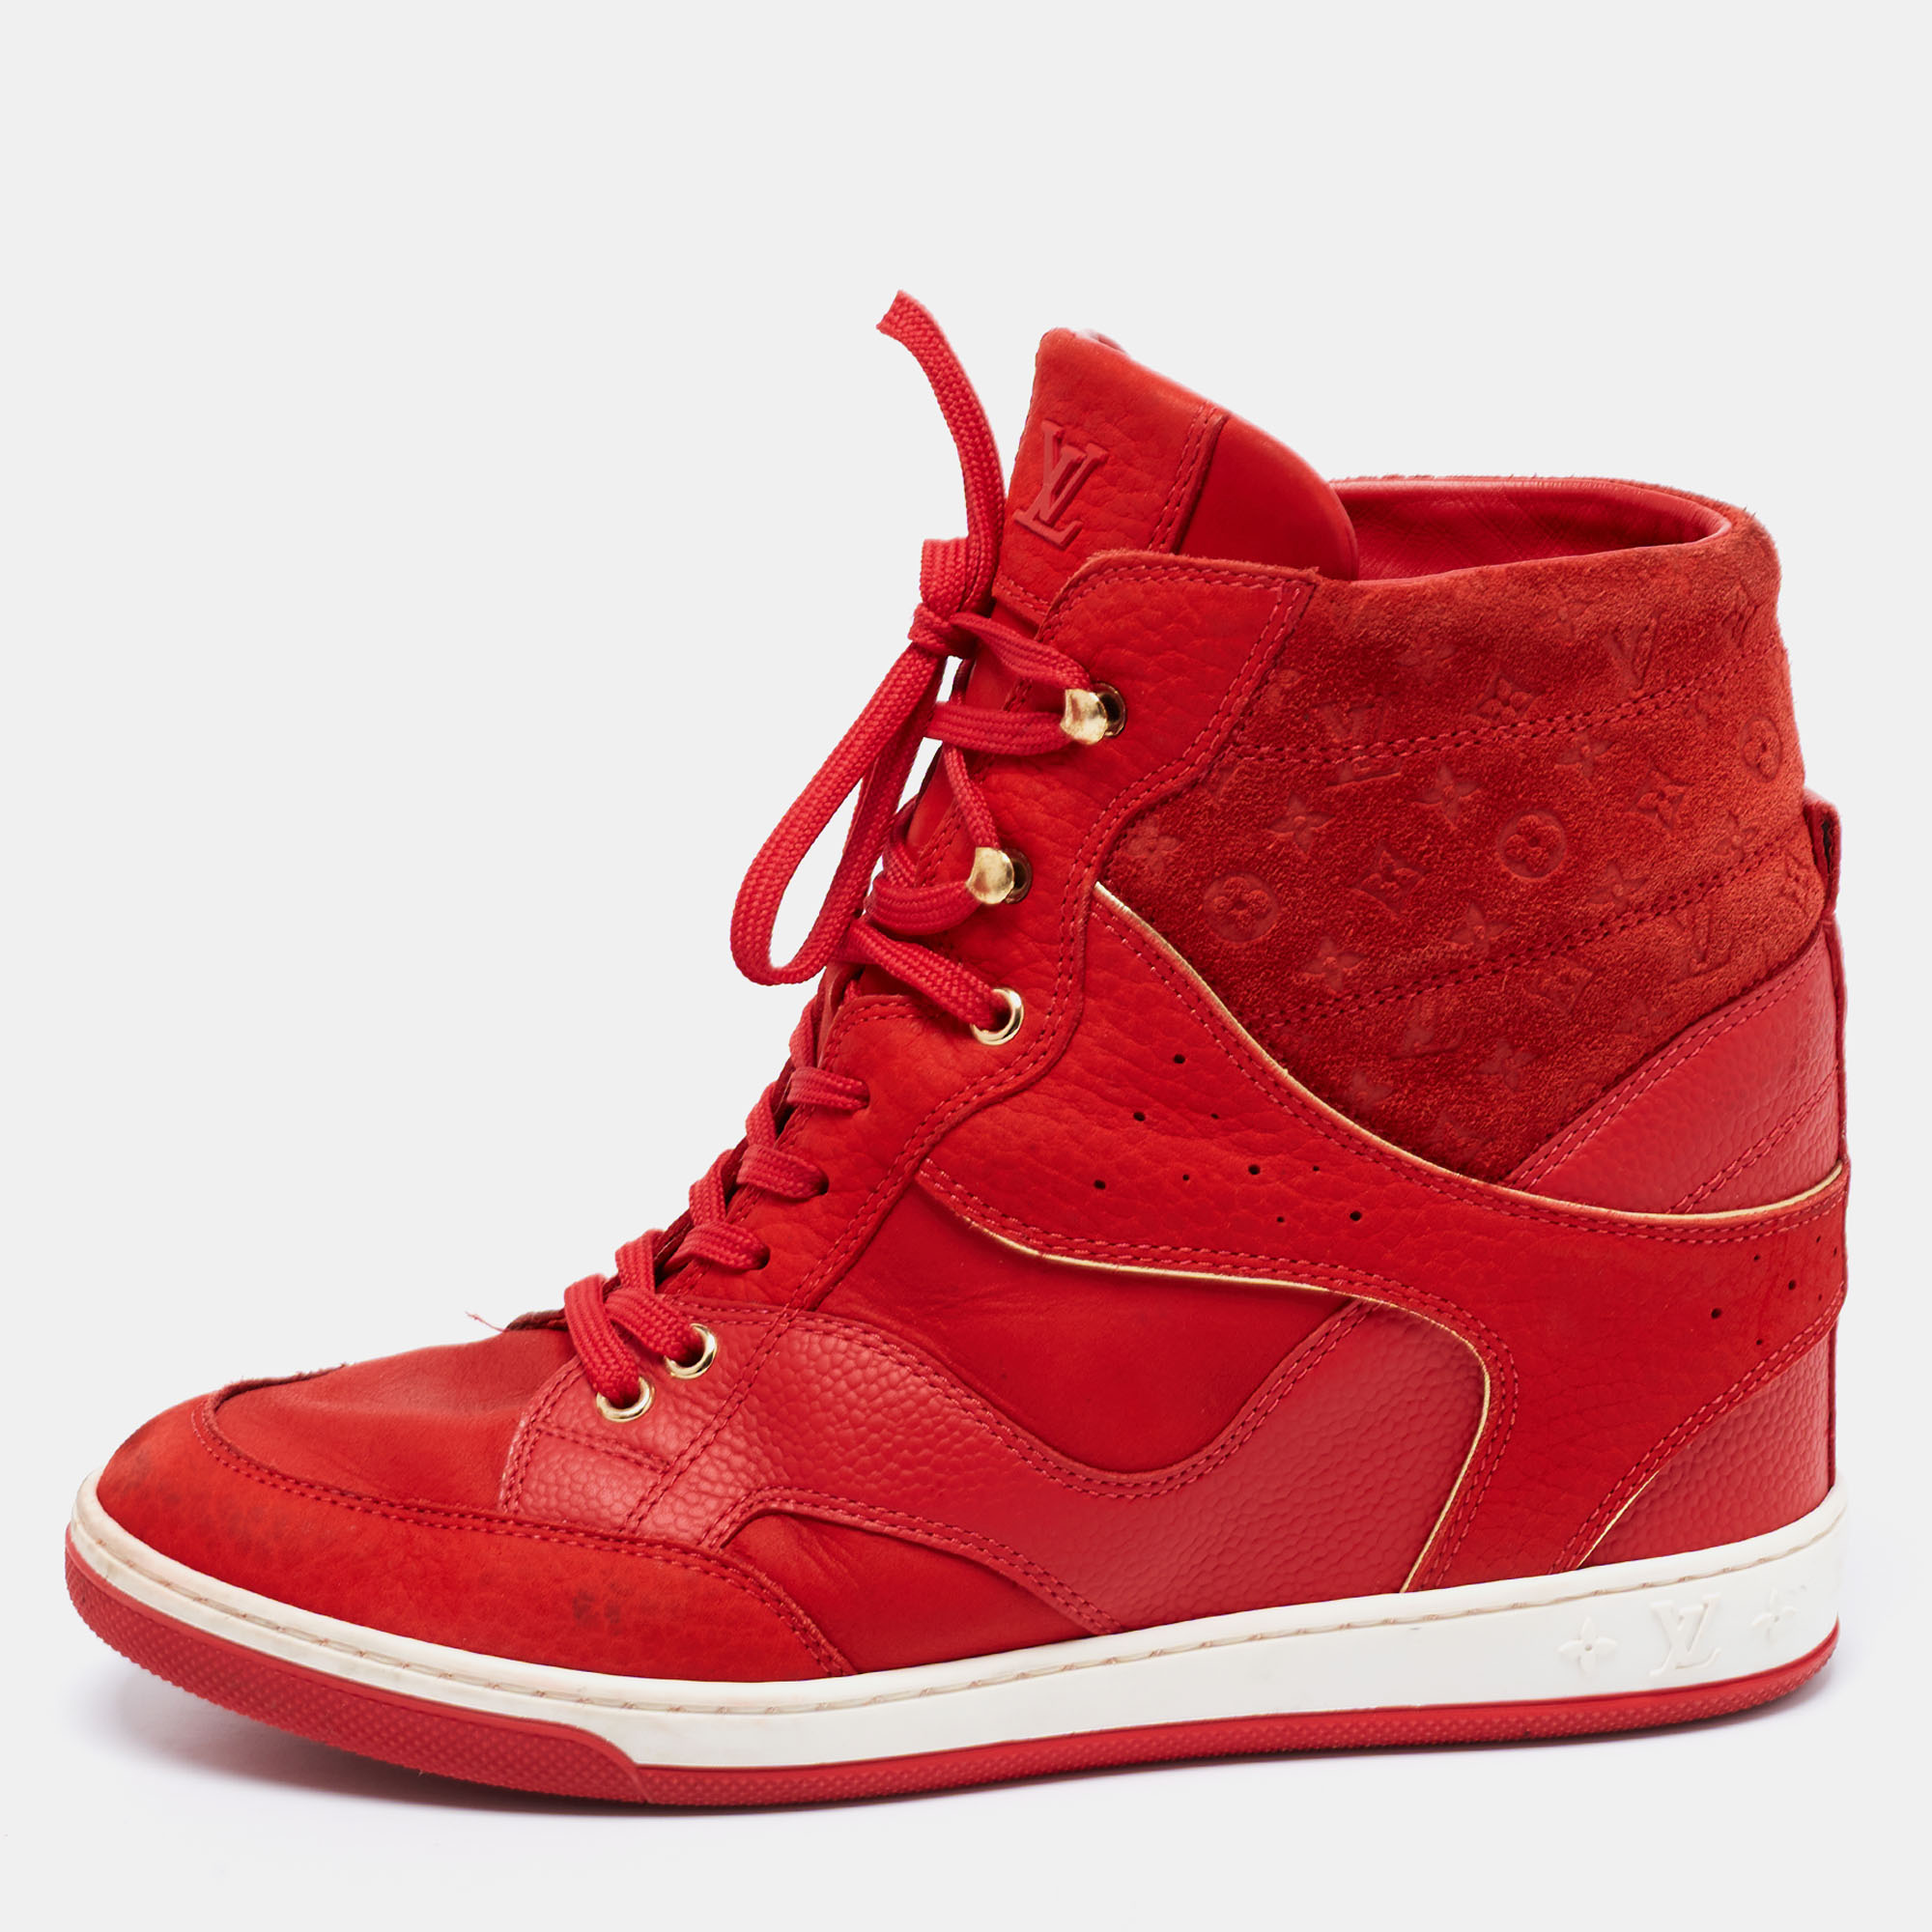 

Louis Vuitton Red Leather And Embossed Monogram Suede Millenium Wedge Sneakers Size